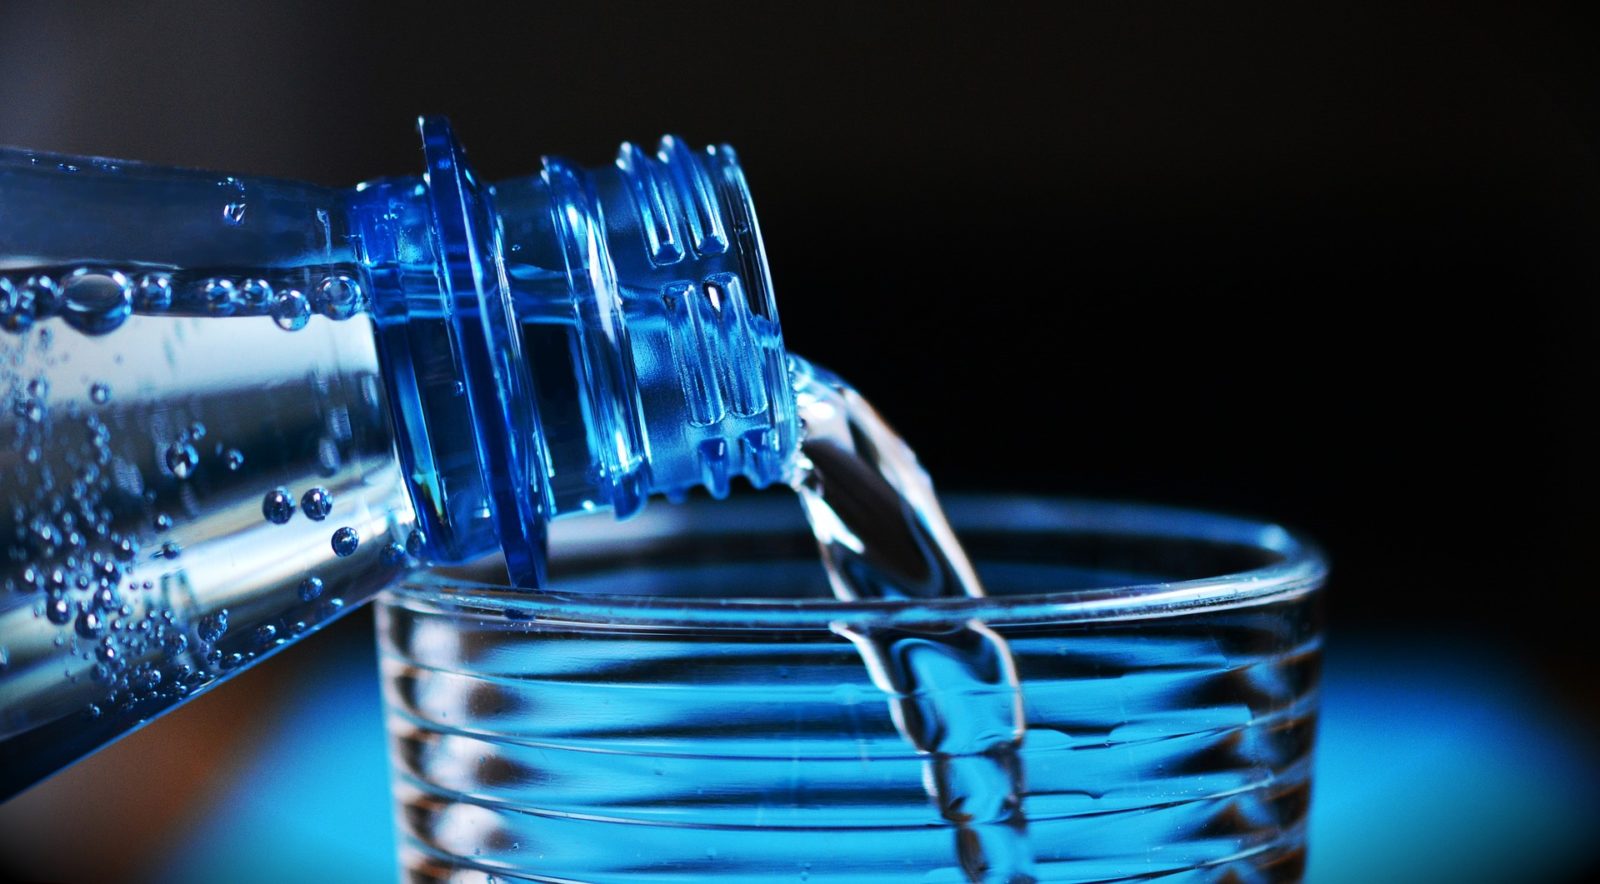 Drink plenty of water to avoid dehydration on hot days